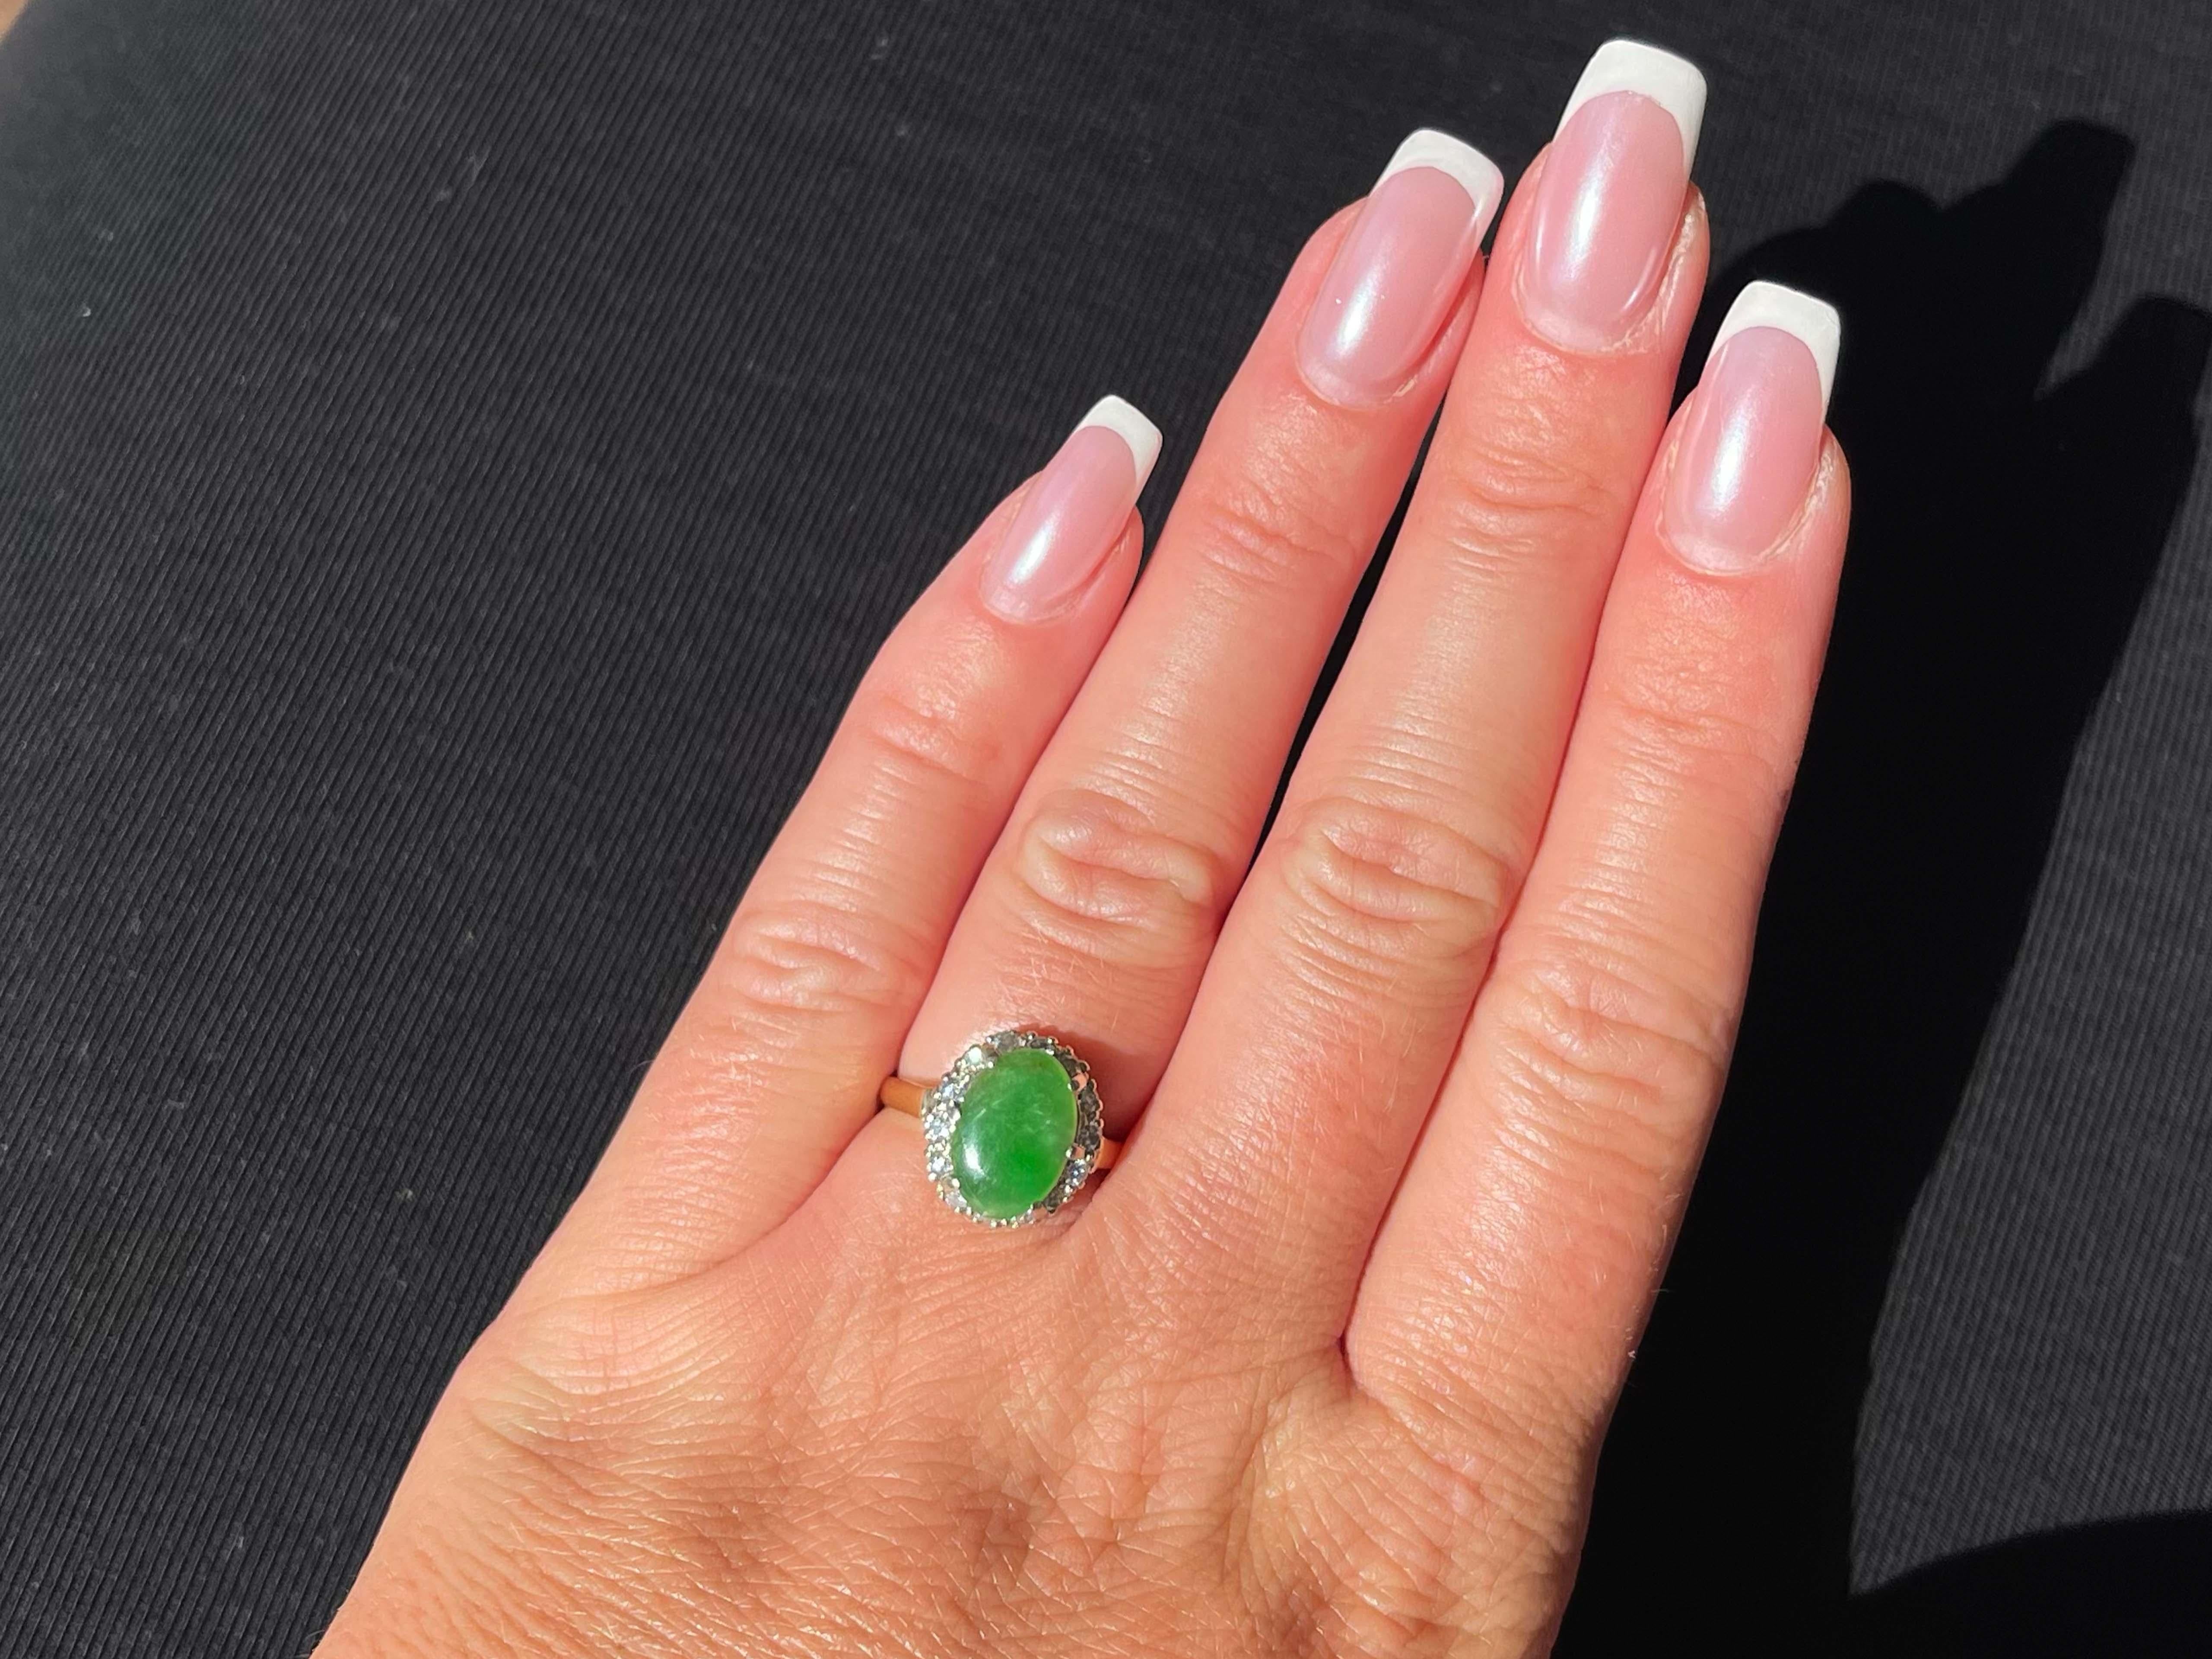 Item Specifications:

Metal: 18K Yellow Gold and 14K White Gold 

Style: Statement Ring

Ring Size: 5.5 (resizing available for a fee)

Total Weight: 3.5 Grams

Gemstone Specifications:

Center Gemstone: Jadeite Jade

Shape: Oval 

Color: